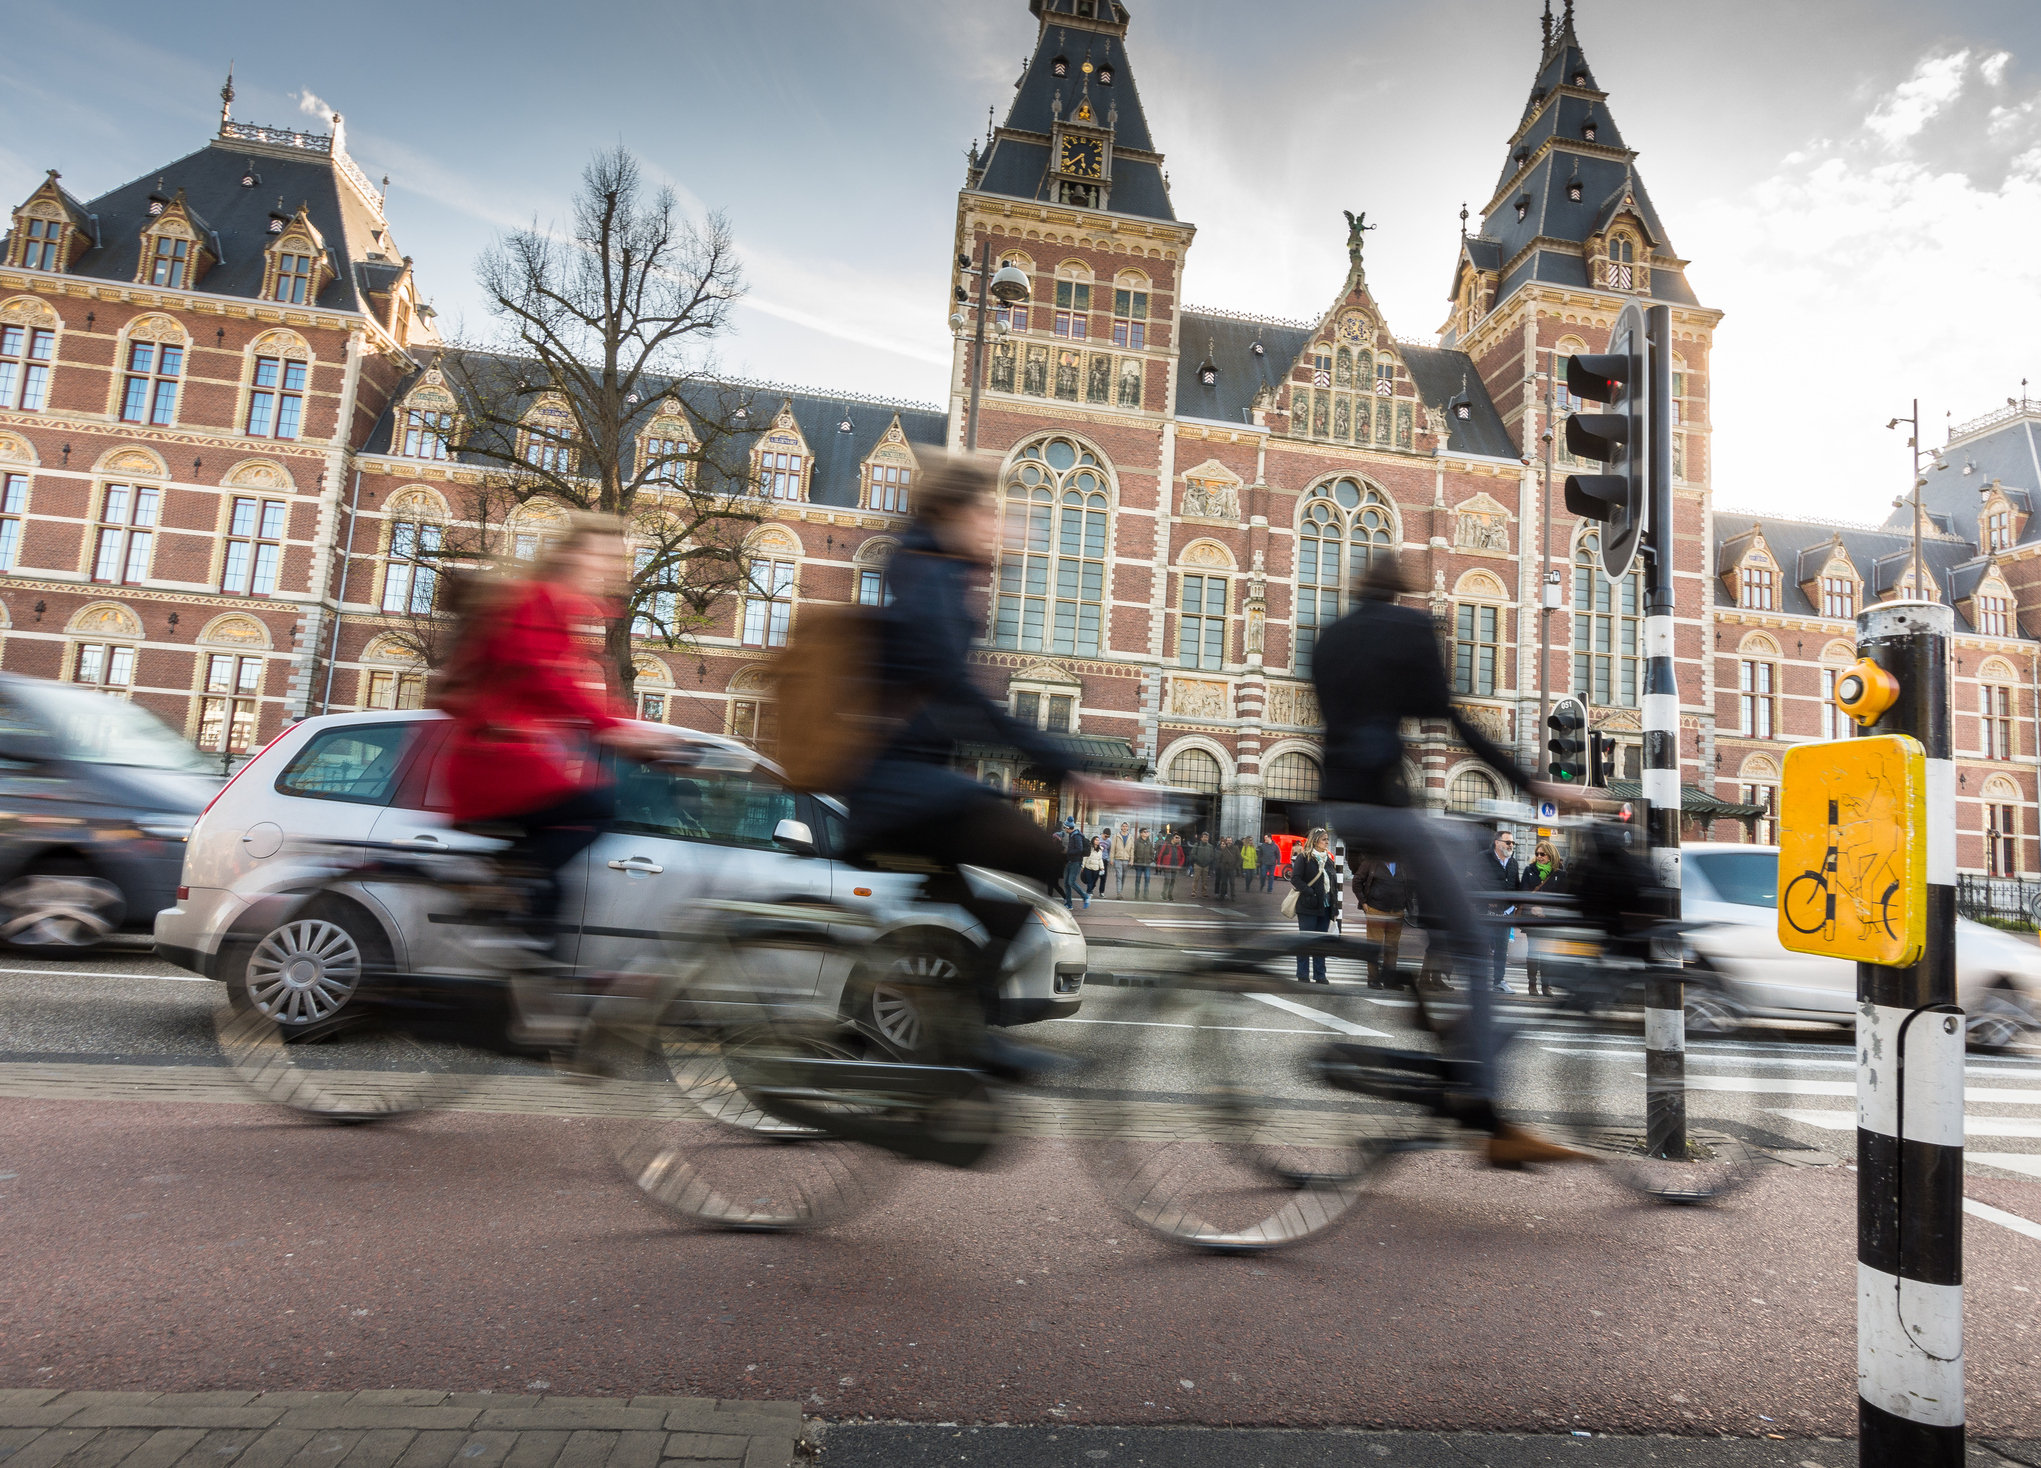 Busy street scene with cyclists and a car, blurred motion, and a building in the background